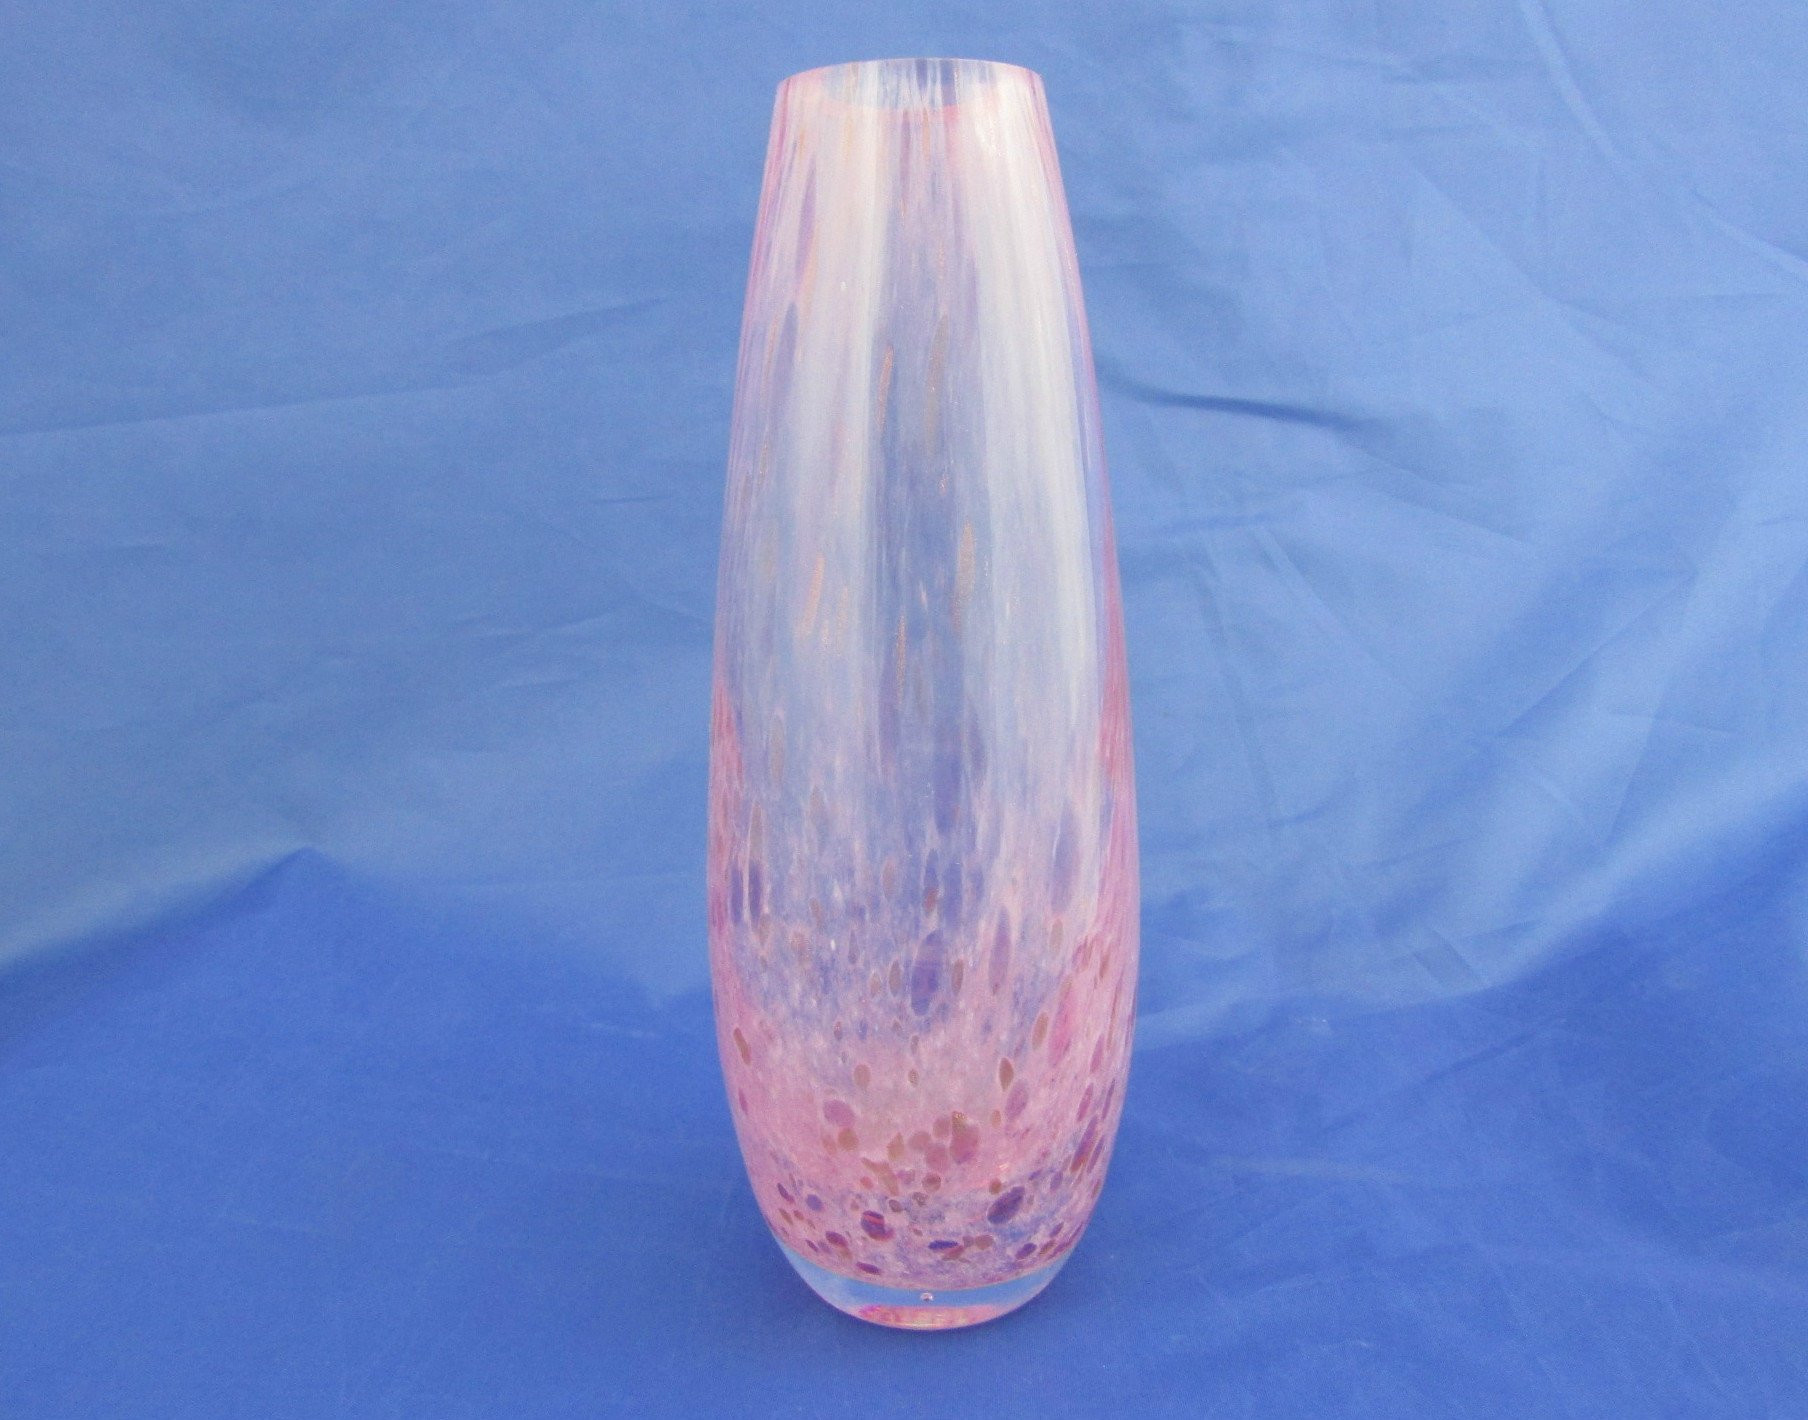 mini clear glass vases of caithness glass vase teardrop shaped vase pink spatter glass etsy in dzoom